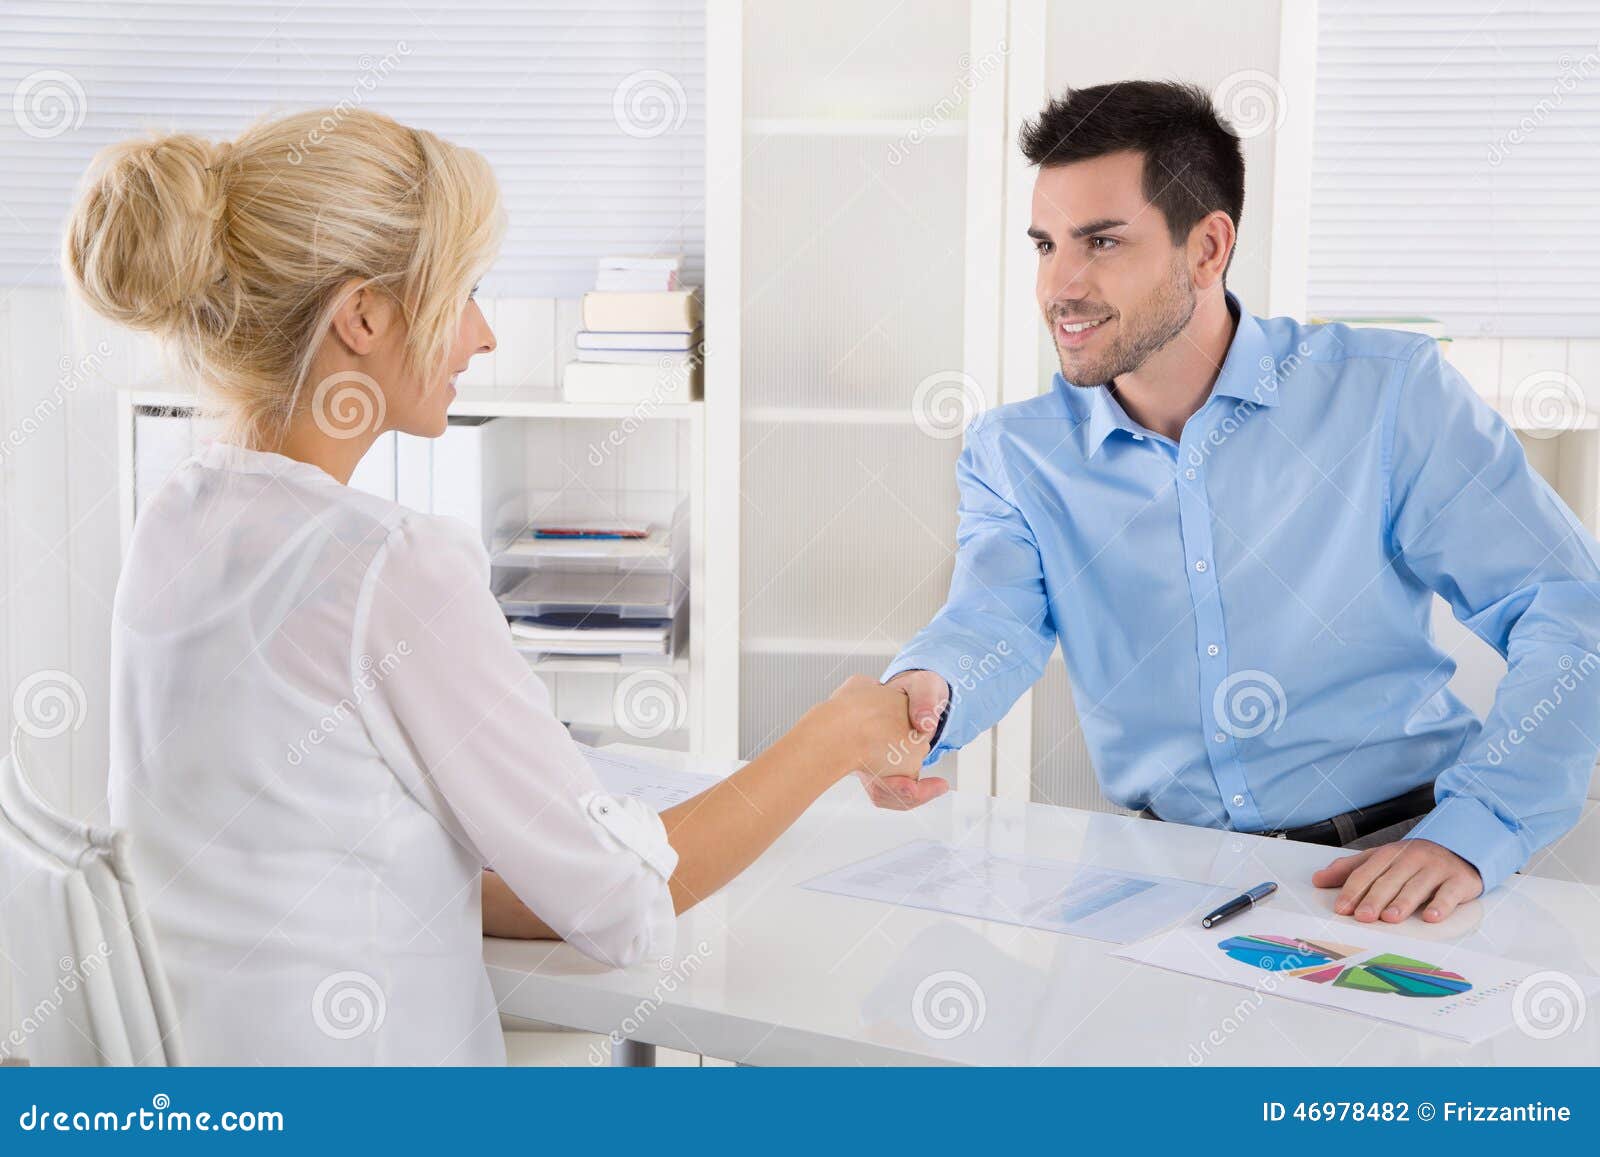 handshake: business people in a meeting. adviser and customer si